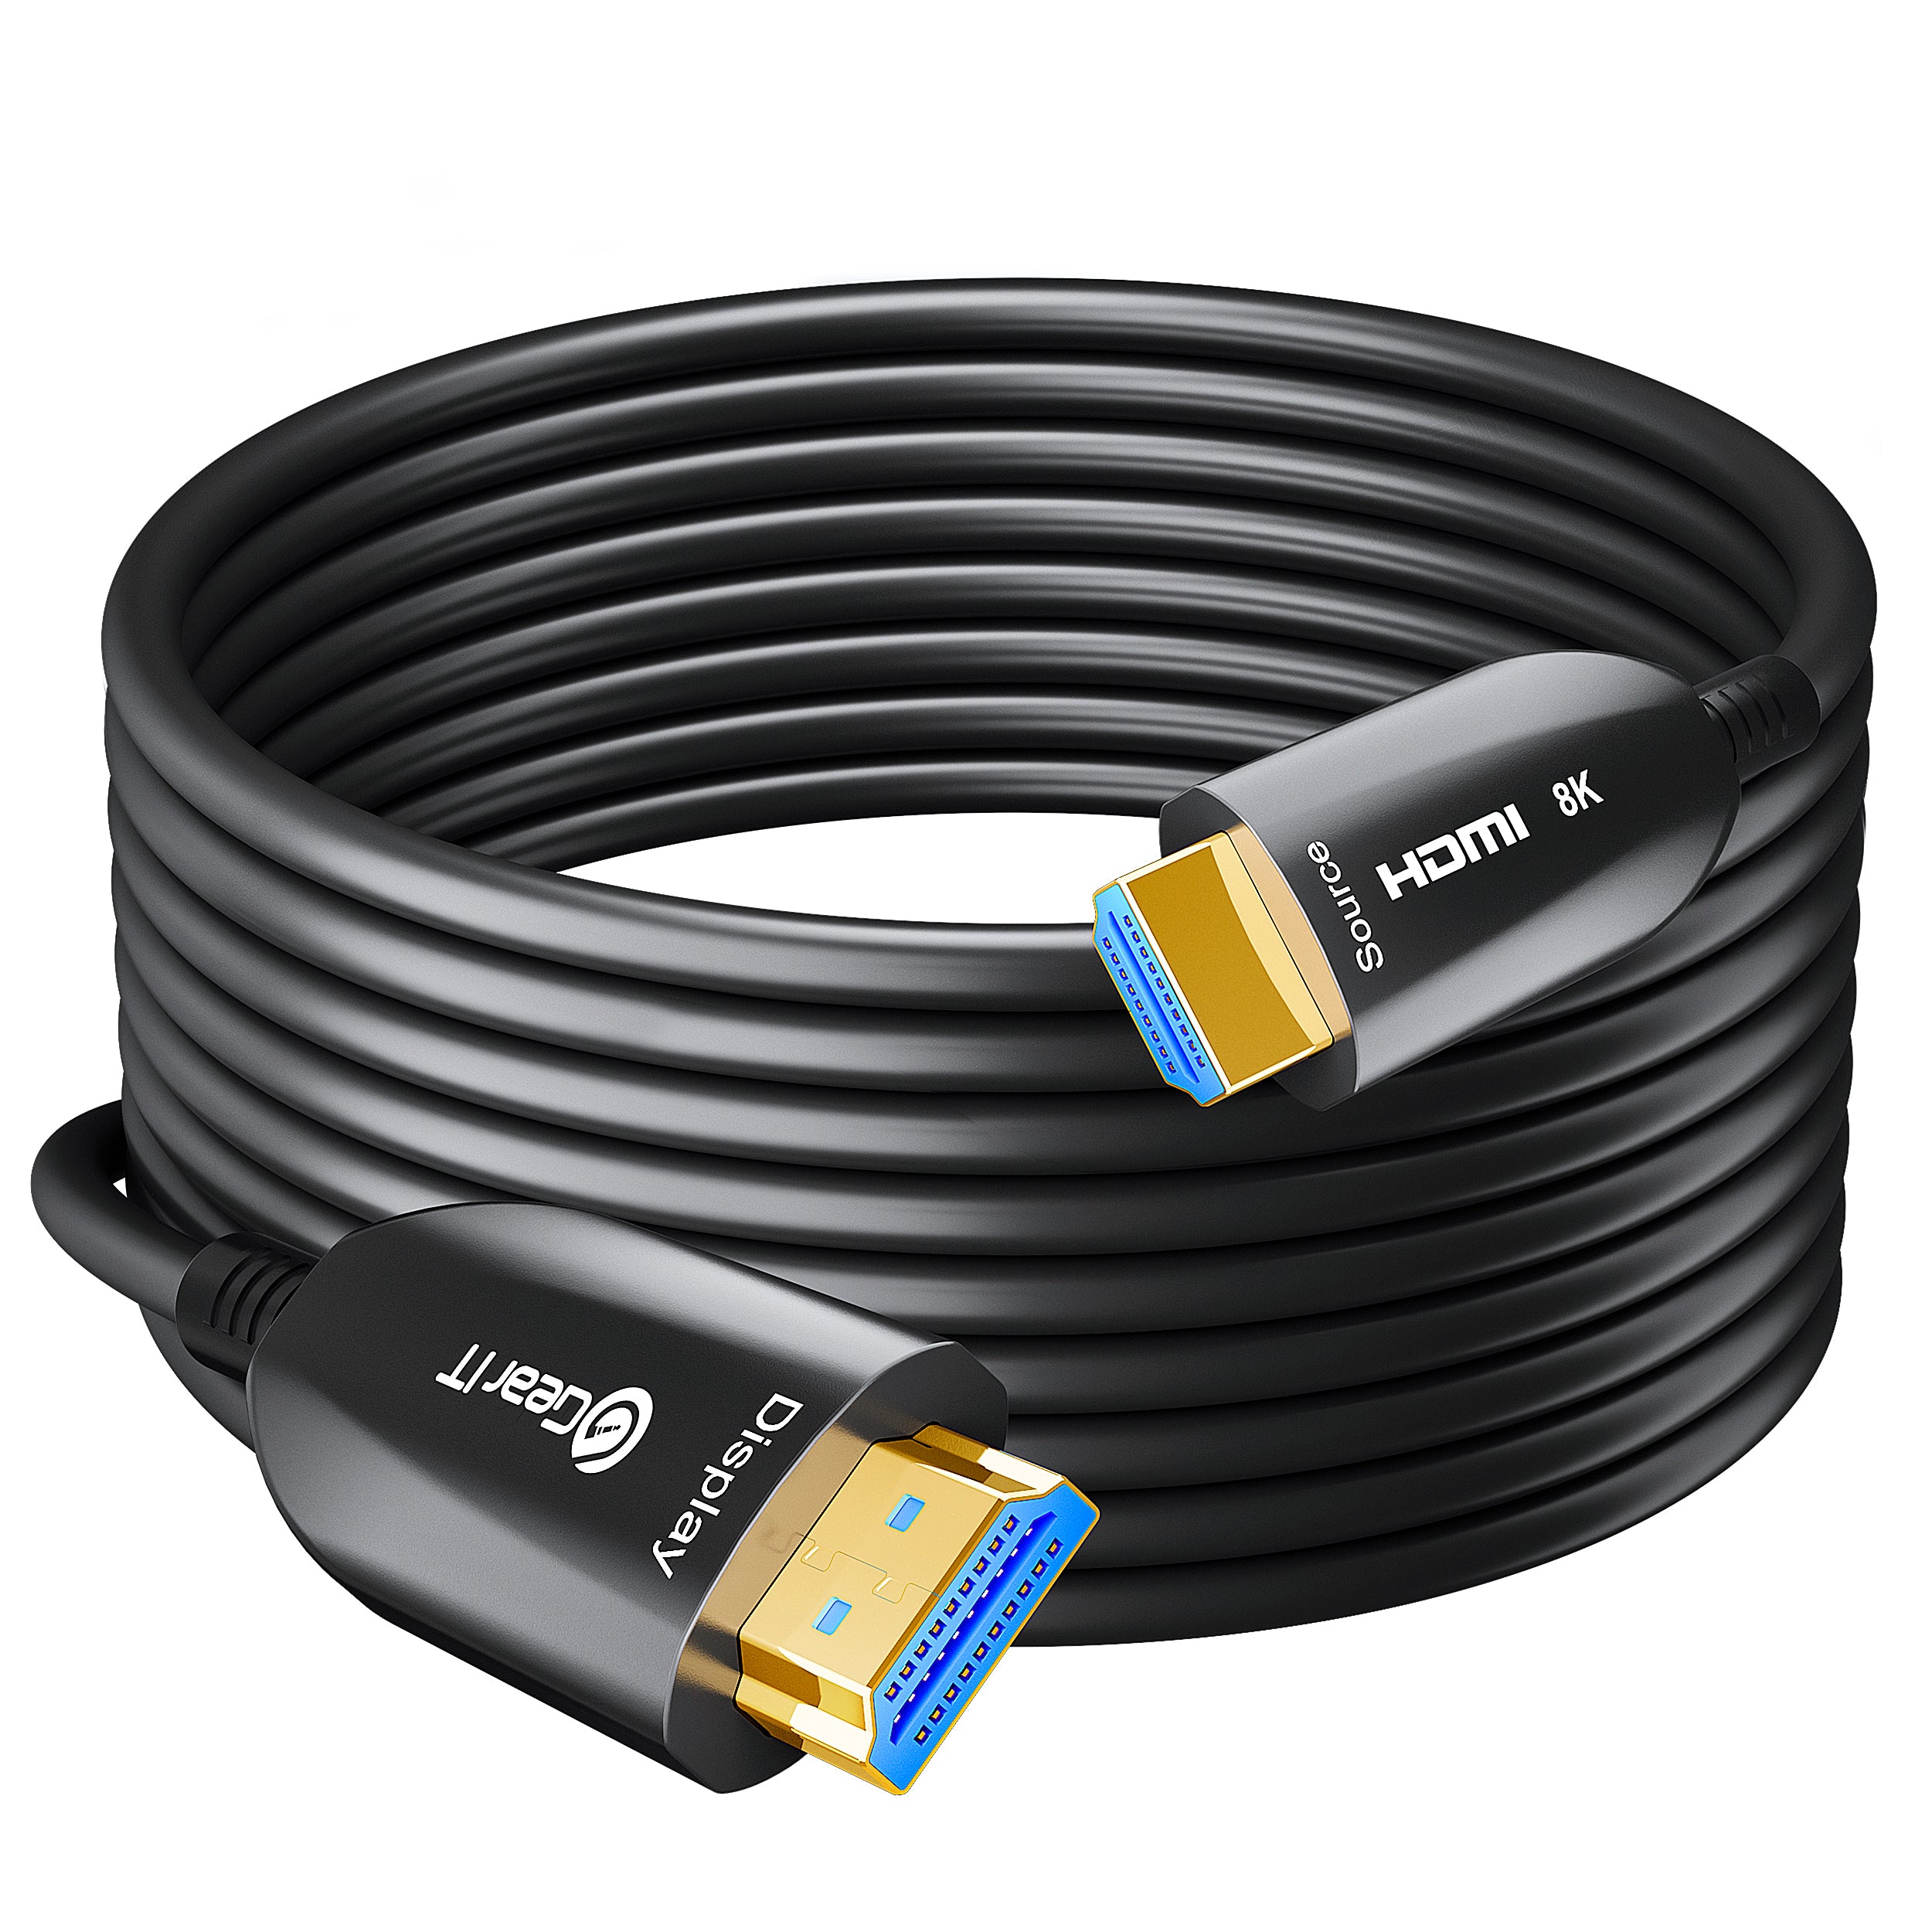 kenable Ultra Slim Low Profile HDMI High Speed Cable Gold for HD TV